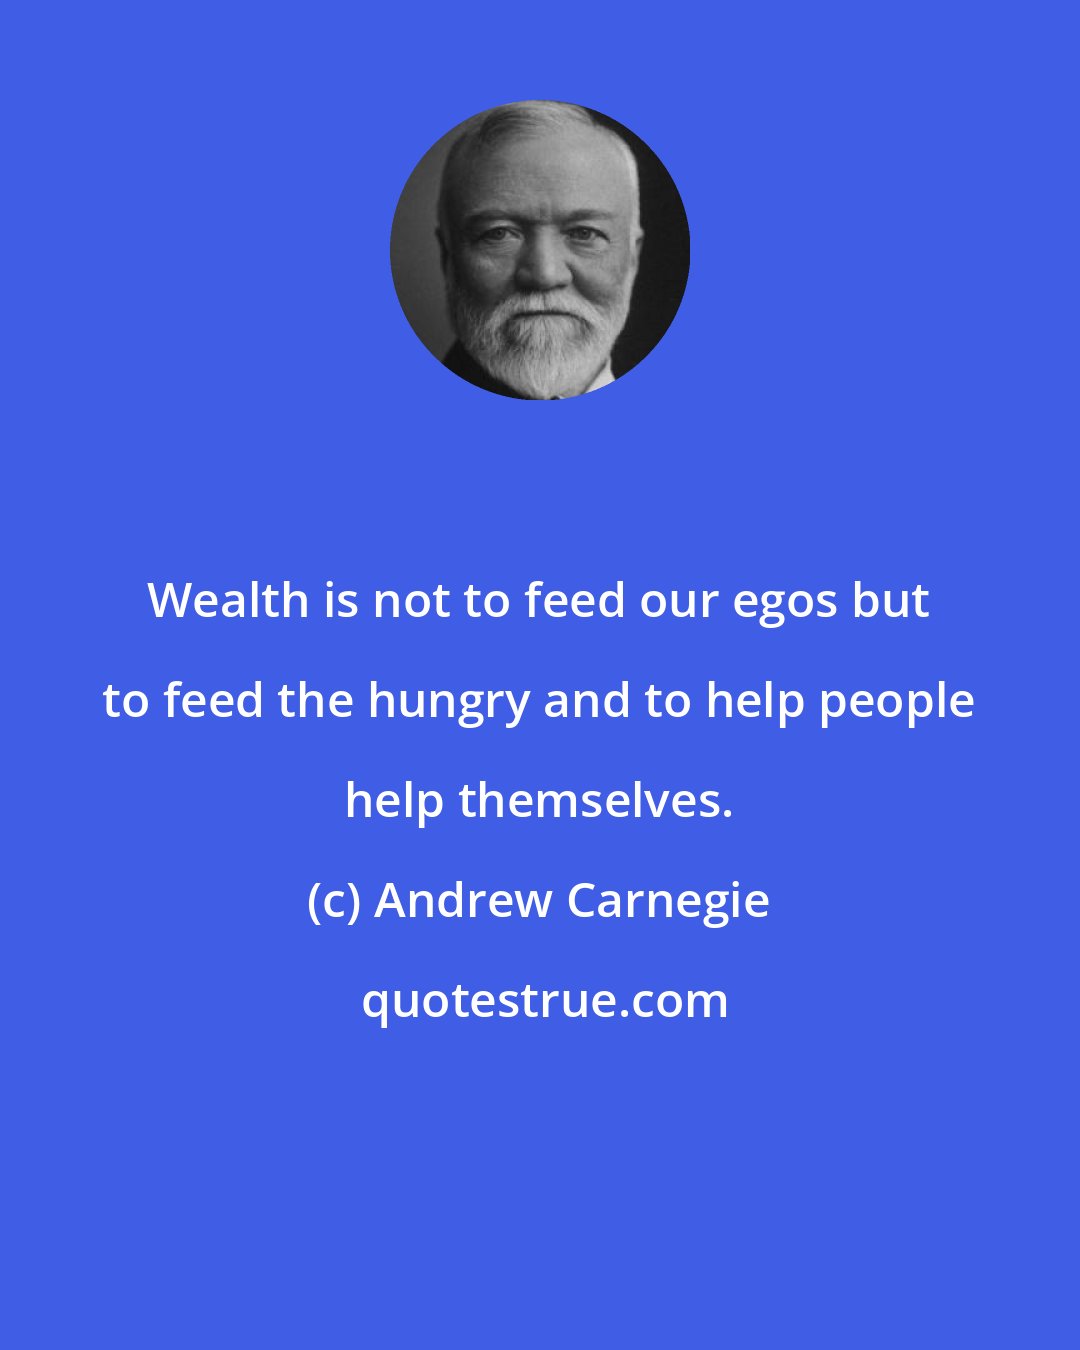 Andrew Carnegie: Wealth is not to feed our egos but to feed the hungry and to help people help themselves.